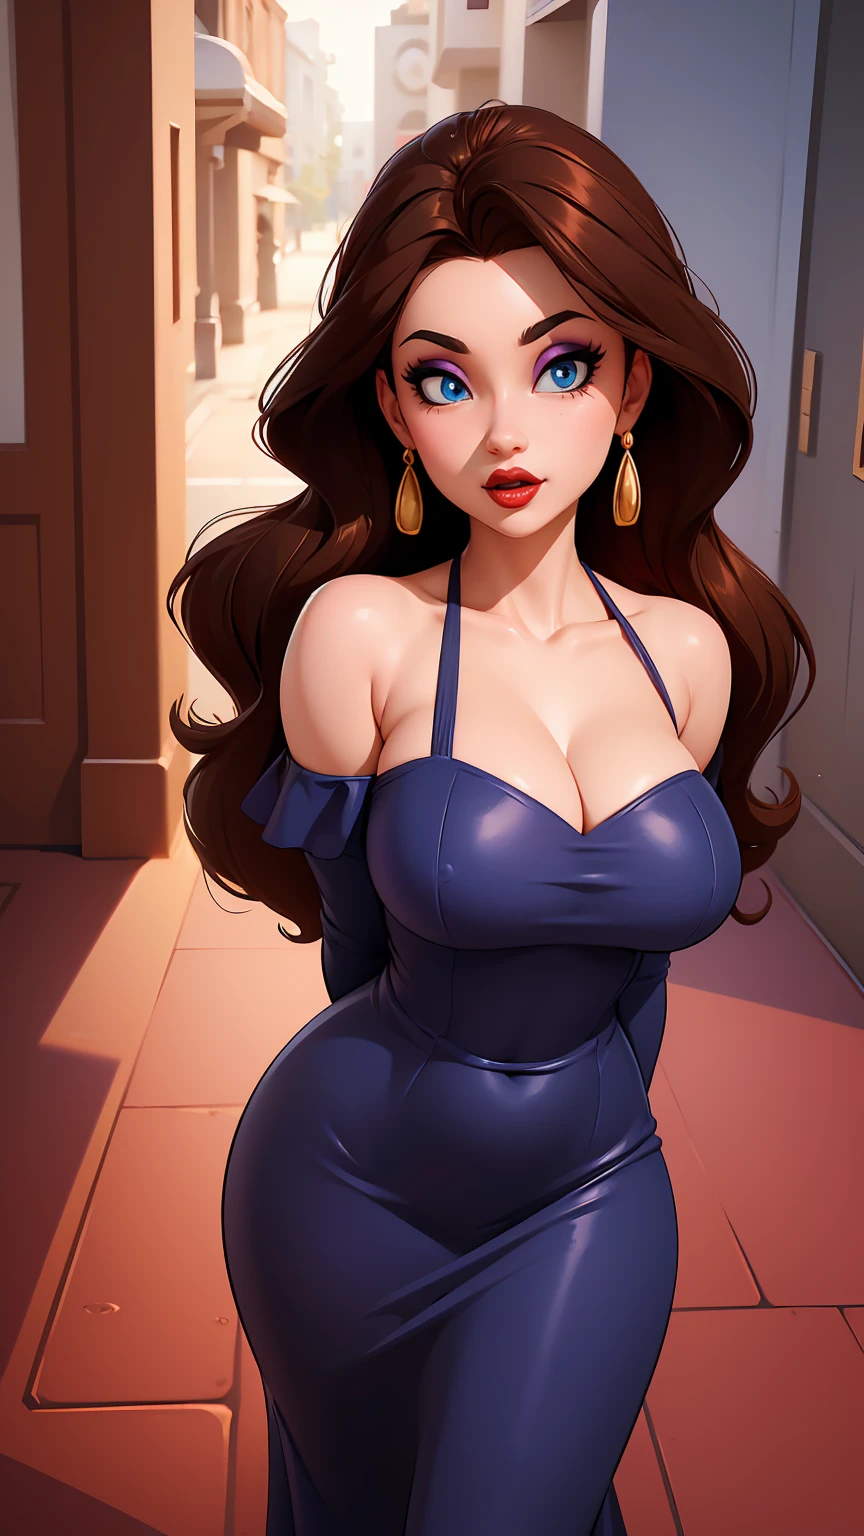 ((high detailed, best quality, 4k, masterpiece, hd:1.3)), ((best quality)), (((HD))), (((8k))), (ultraDH), (ultra HD), blue eyes, BREAK blue eyes, seductive, attractive, smooth anime cg art, 36C breasts, long legs, vivid colors, slim body, perfect skin, brown hair, long hair, light hair, brown hair, cleavage, 36C cleavage, looking at viewer, BREAK looking at viewer, extremely detailed face, earrings, gem, dark blue makeup lips, dark gothic eyeshadows, dark eyeshadows, white eyeshadows, red sexy lips, dark lips, very dark lips, (perfect hands, perfect anatomy), light makeup, red medium lips, red thick lips, detailed fingers, five fingers per hand, 5 fingers, (1 girl), detailed lips, detailed red lips, red painted lips, gothic painted lips, (breast focus), (arms outstreched:1.2), (from above:1.1), (breasts out:1.3), (off shoulder:1.1), 